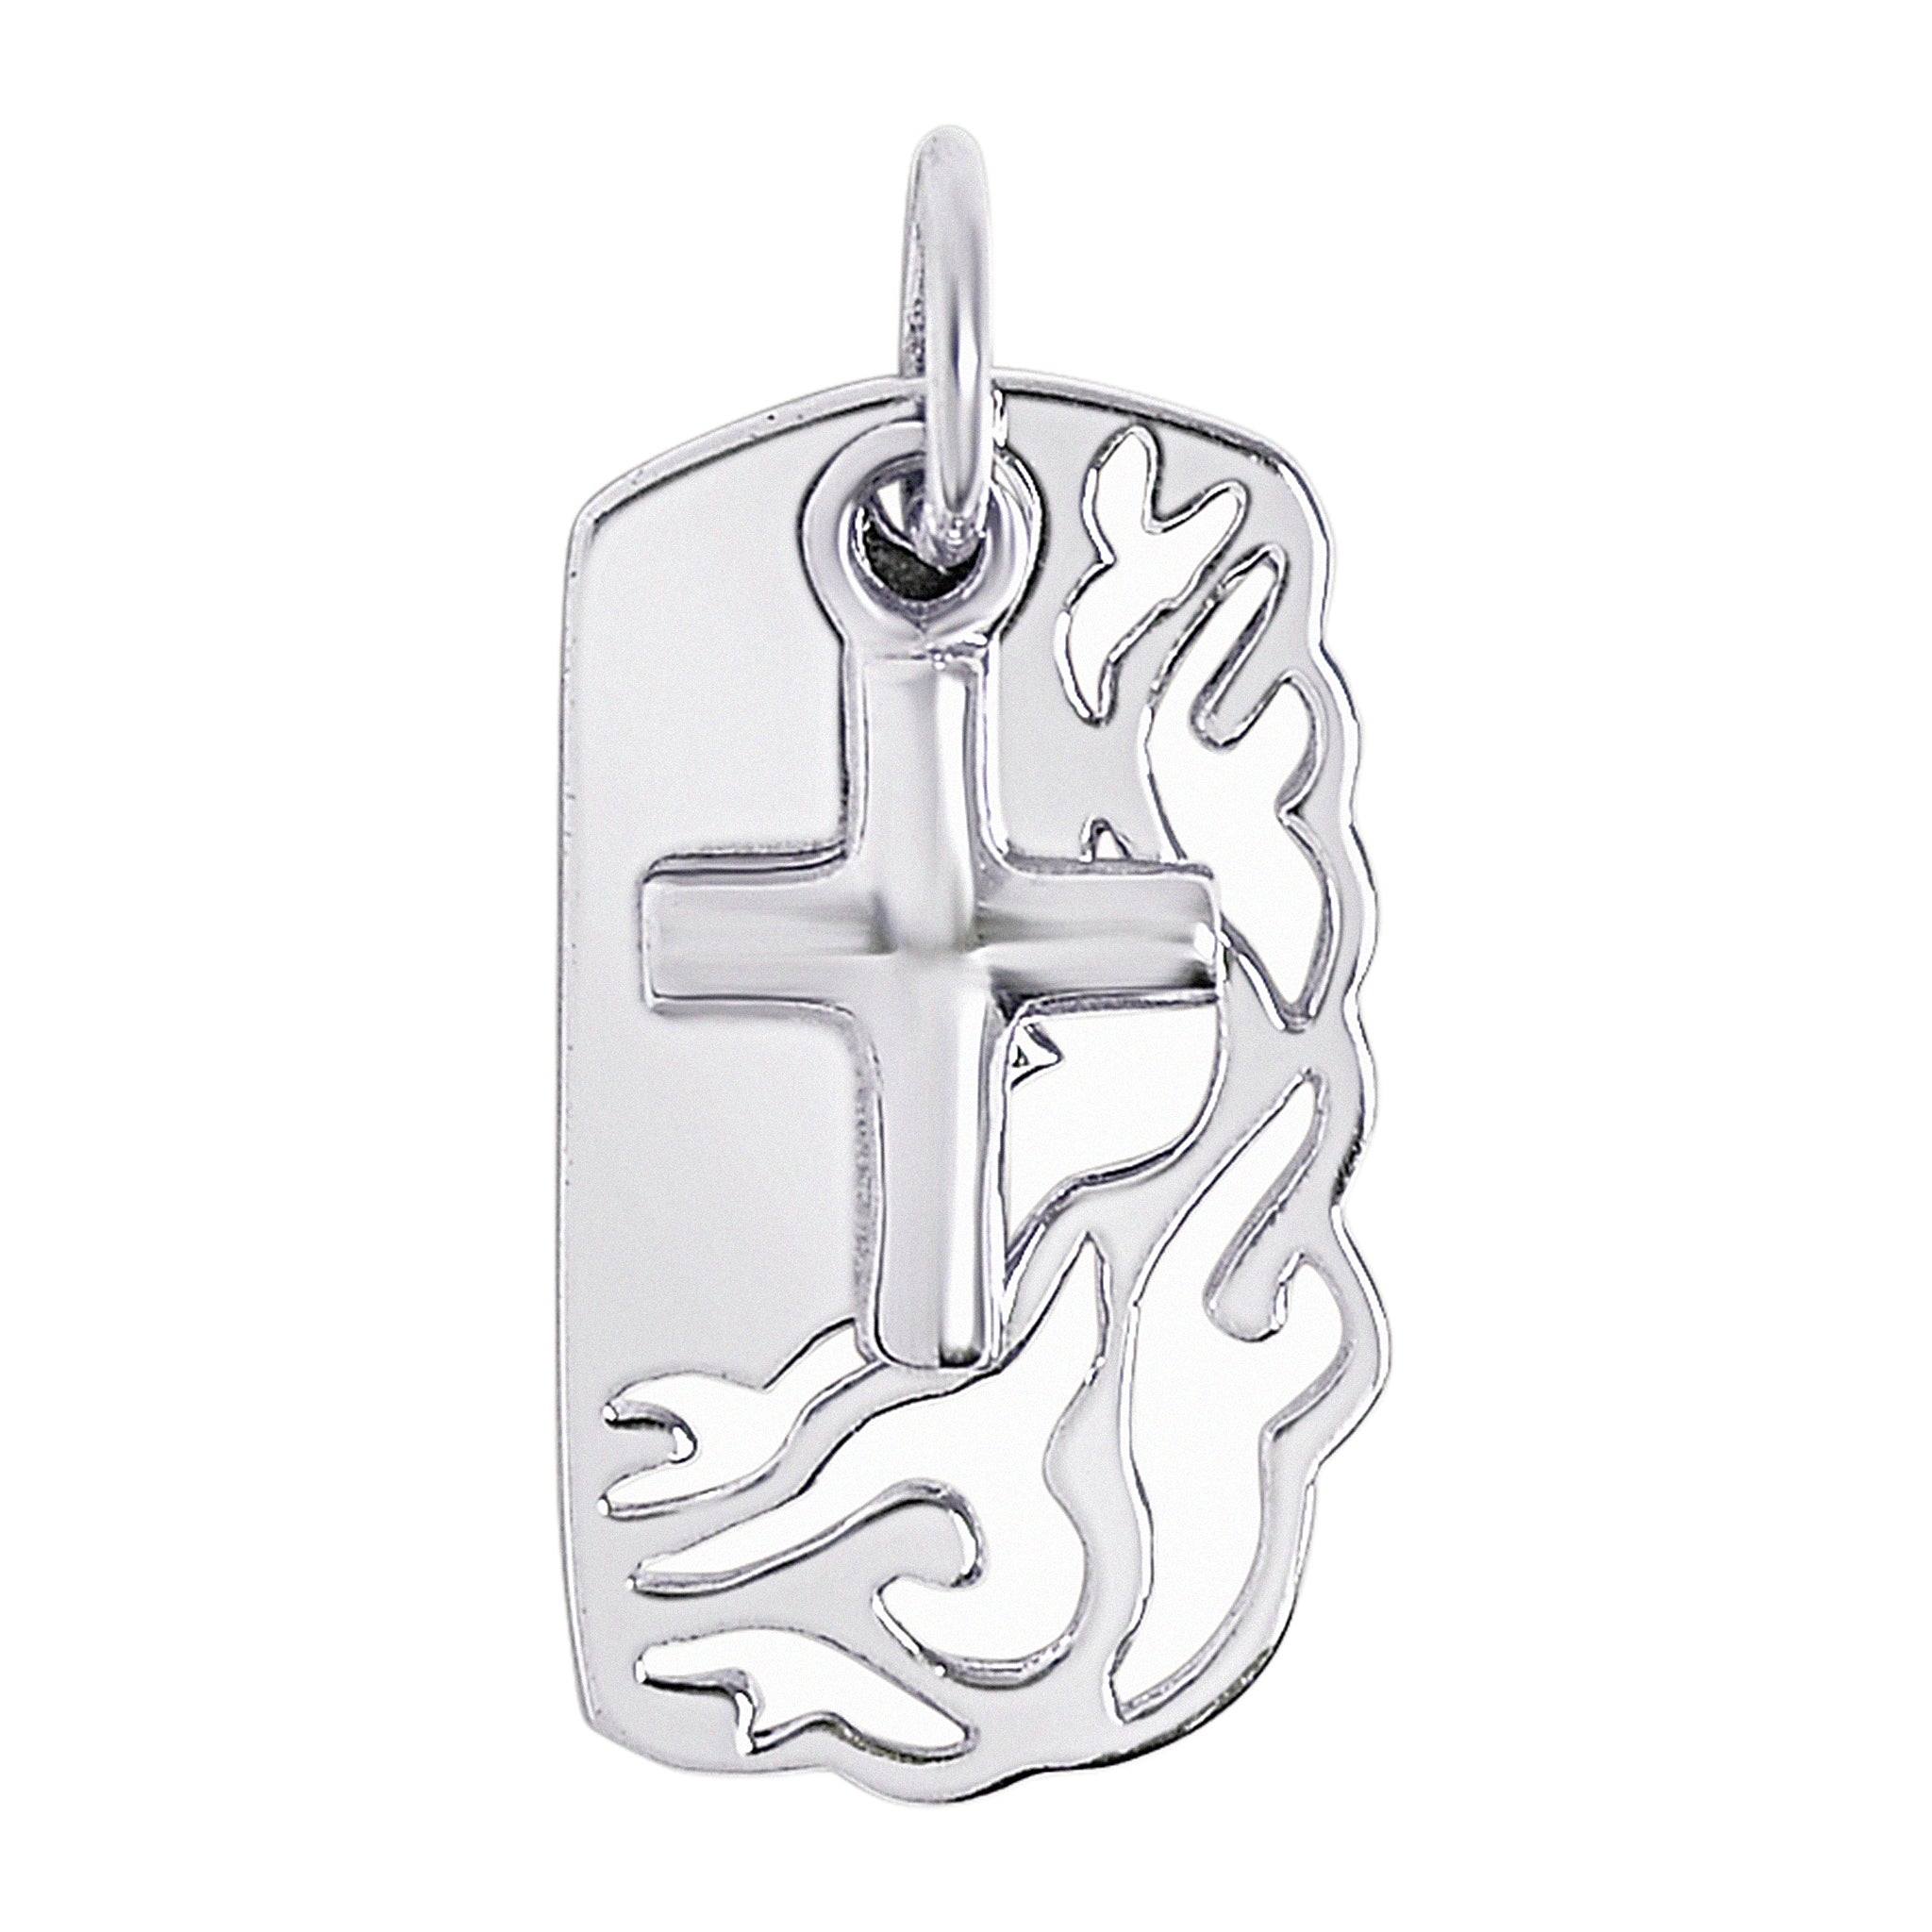 Sterling Silver Dog Tag Flame Cutout with Cross Pendant / SSP0105-sterling silver pendant- .925 sterling silver pendant- Black Friday Gift- silver pendant- necklace pendant